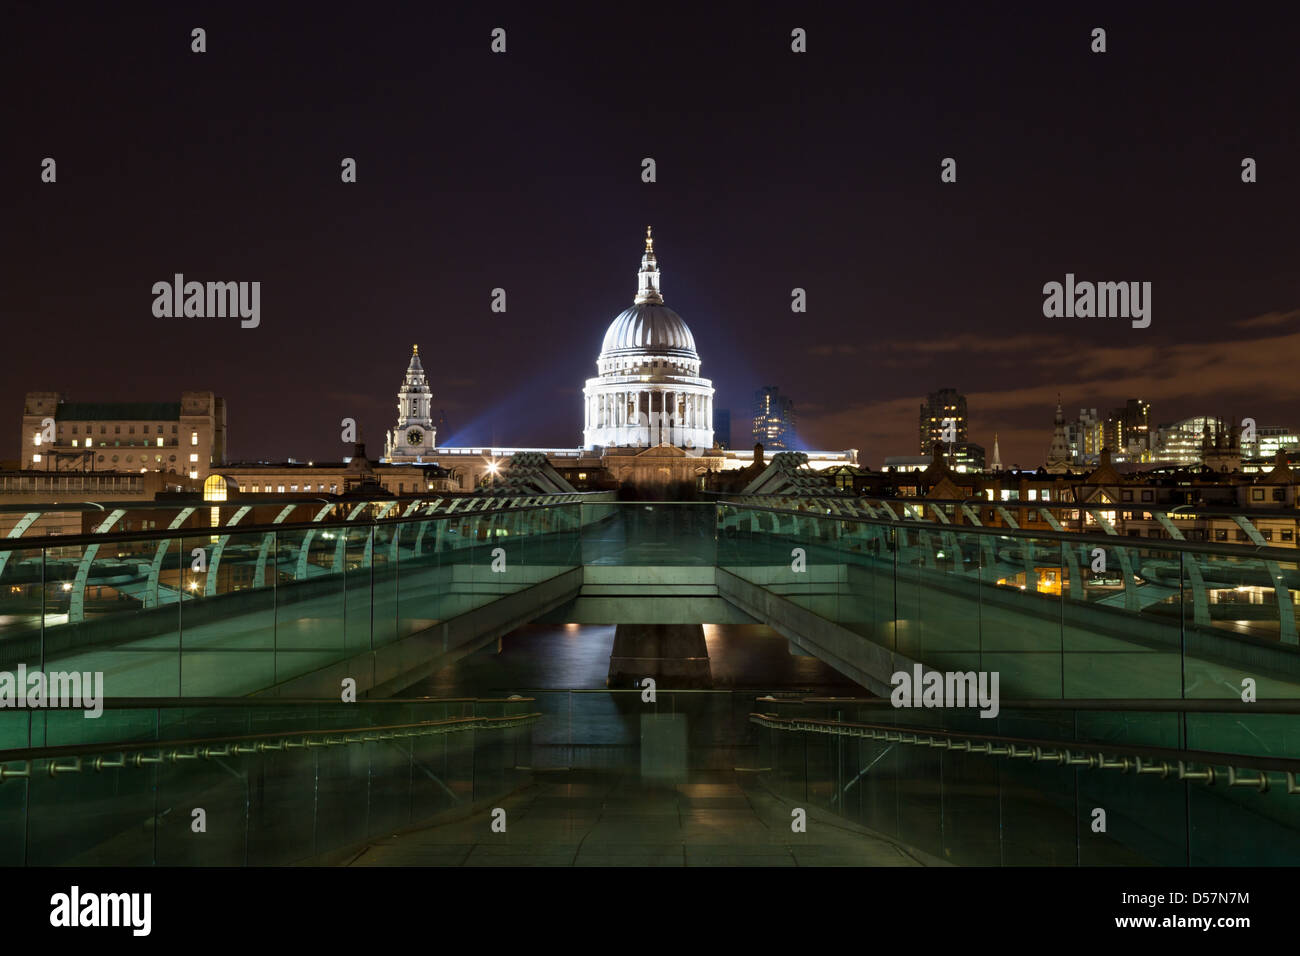 A view of a floodlit St. Paul's Cathedral from the South end of the Millennium Bridge in Bankside, London. Stock Photo